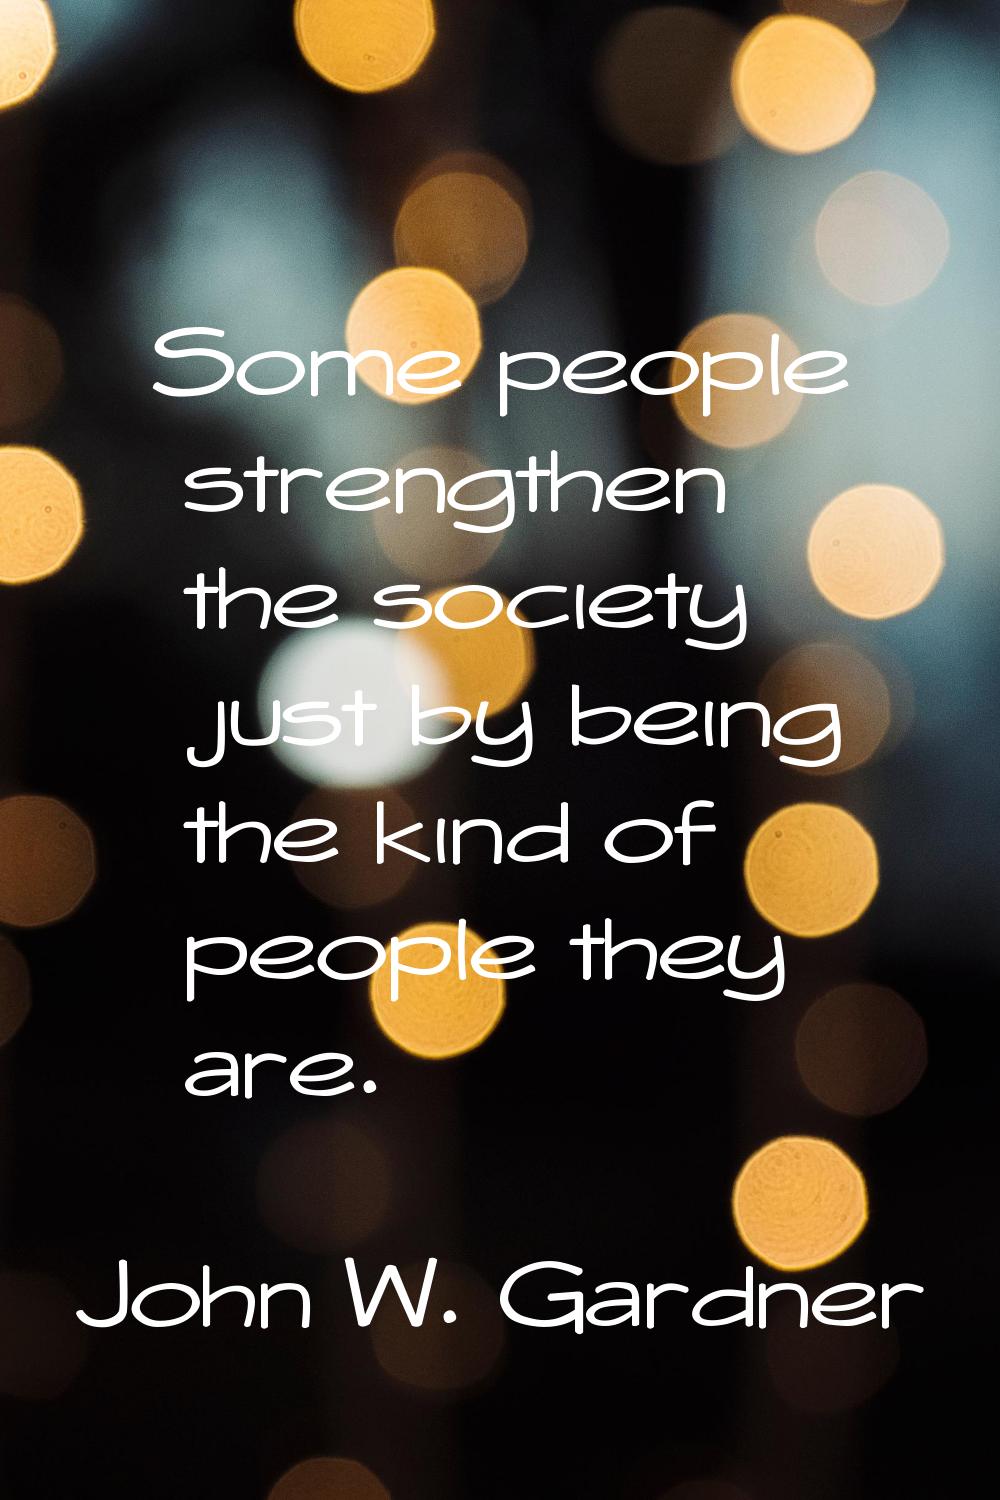 Some people strengthen the society just by being the kind of people they are.